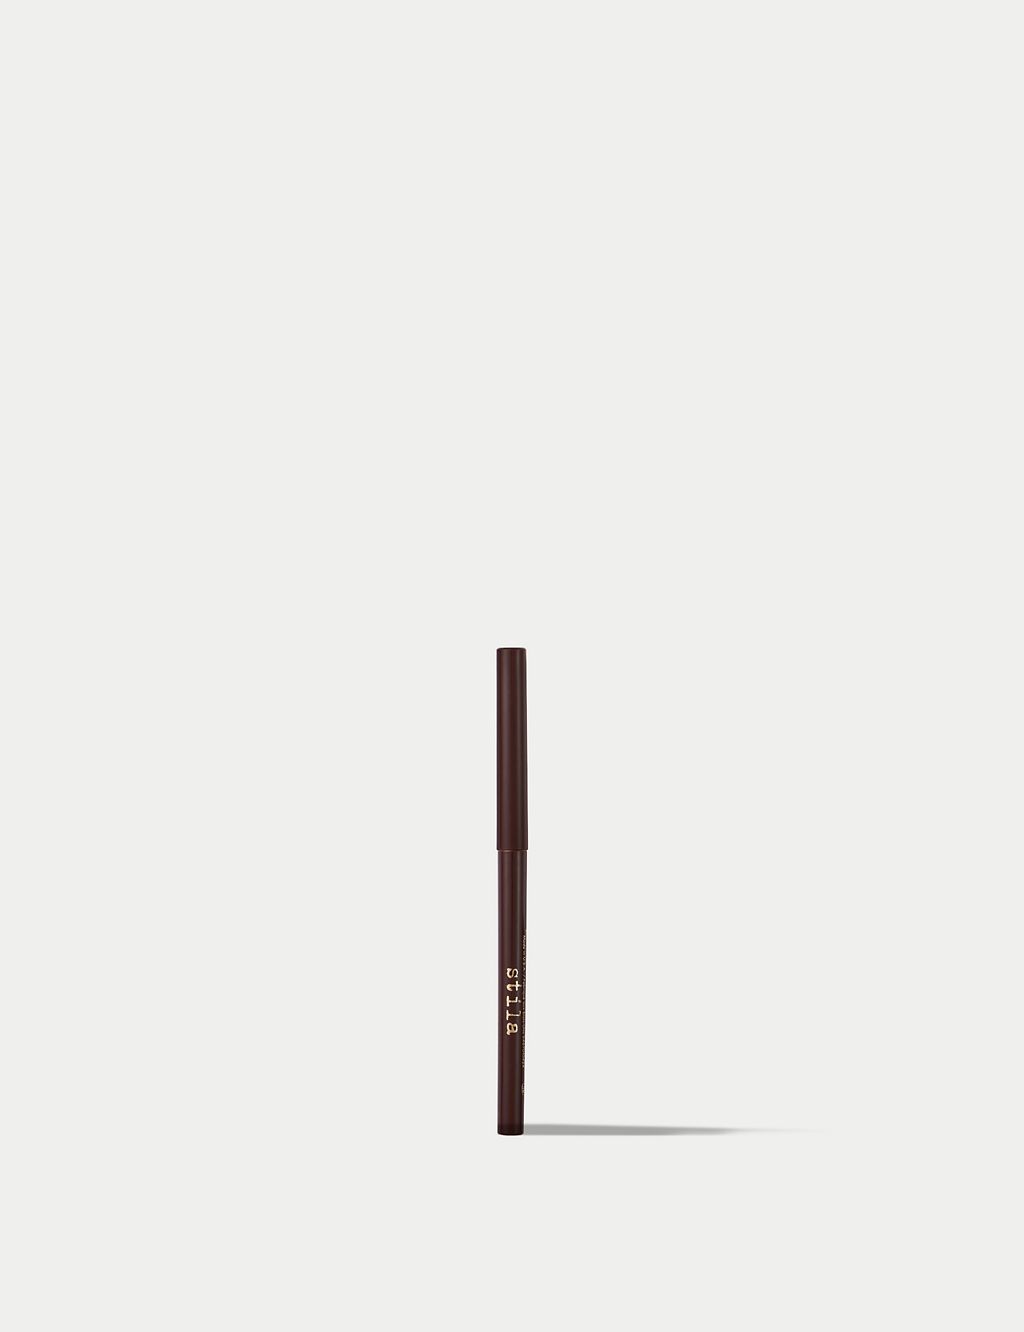 Stay All Day® Smudge Stick Waterproof Eye Liner 0.28g 1 of 2